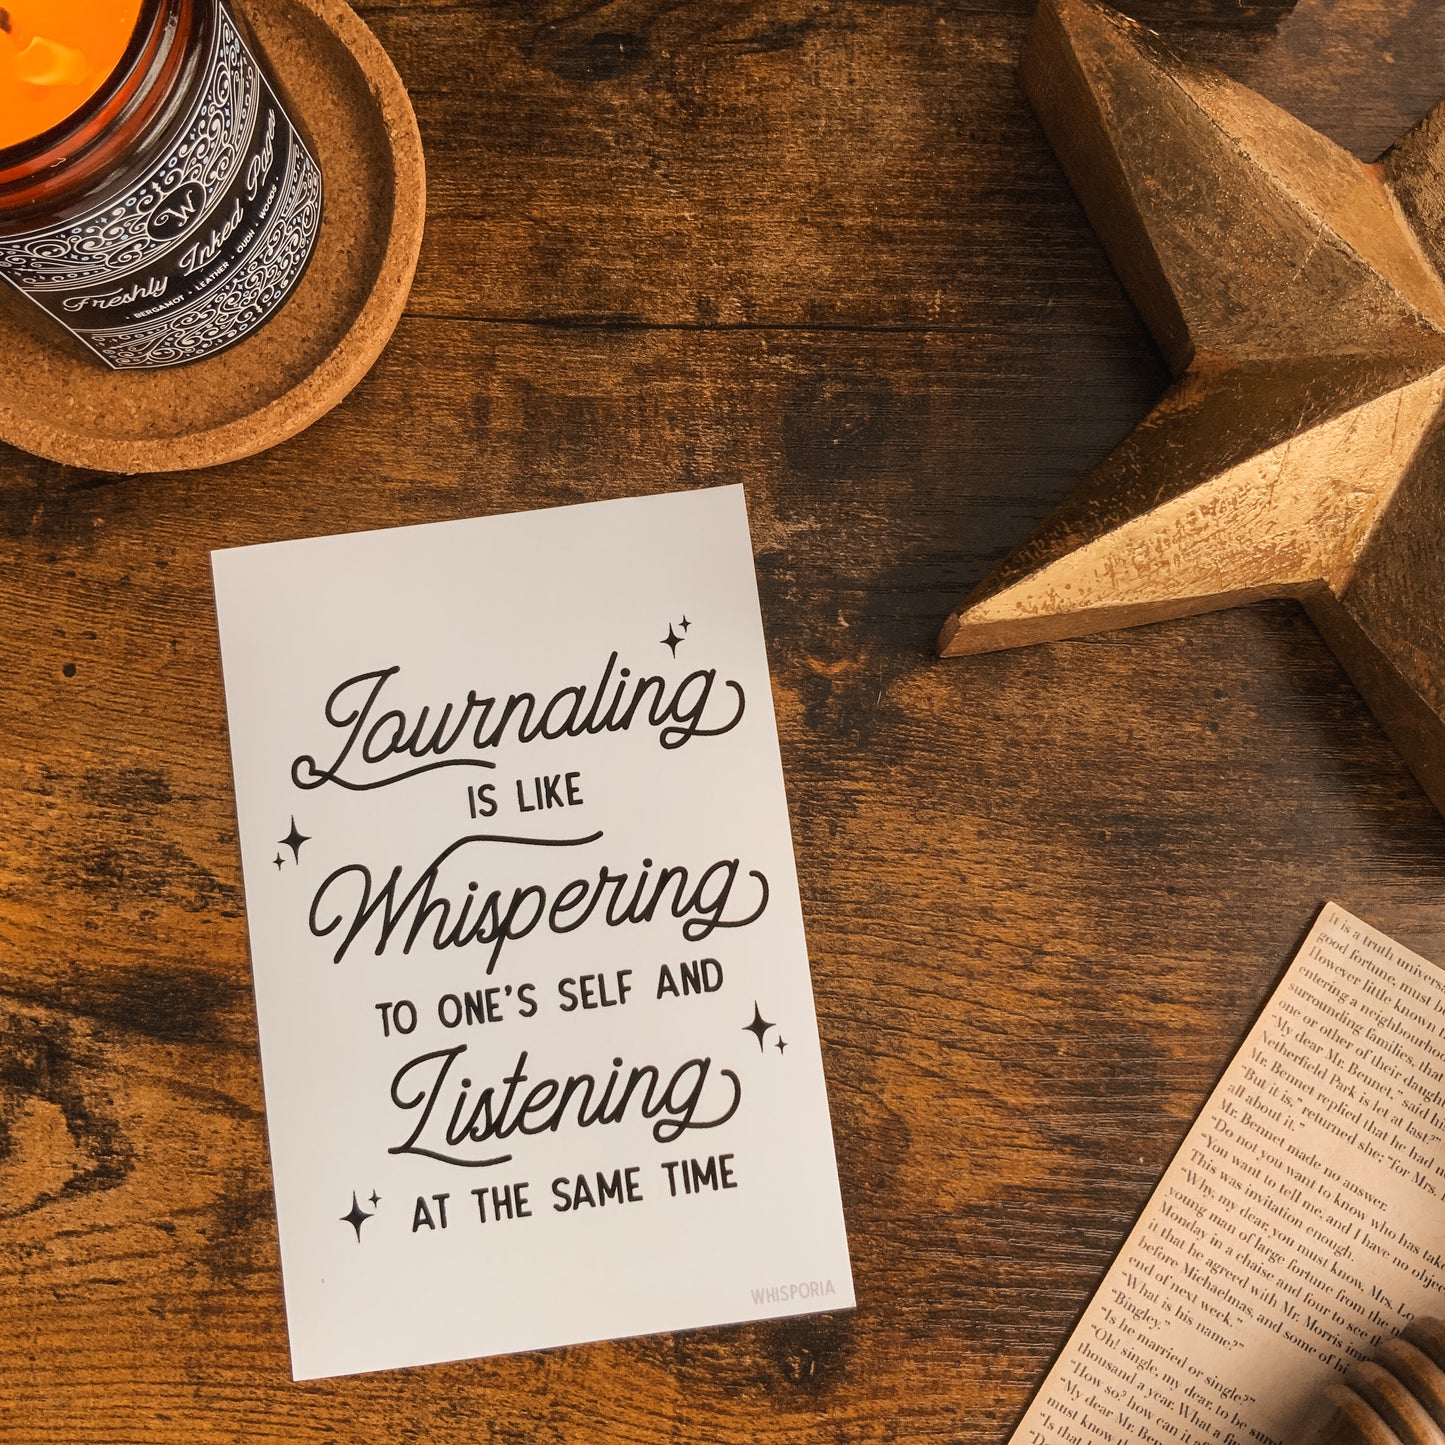 Journaling is like Whispering A6 Print and Journaling Card